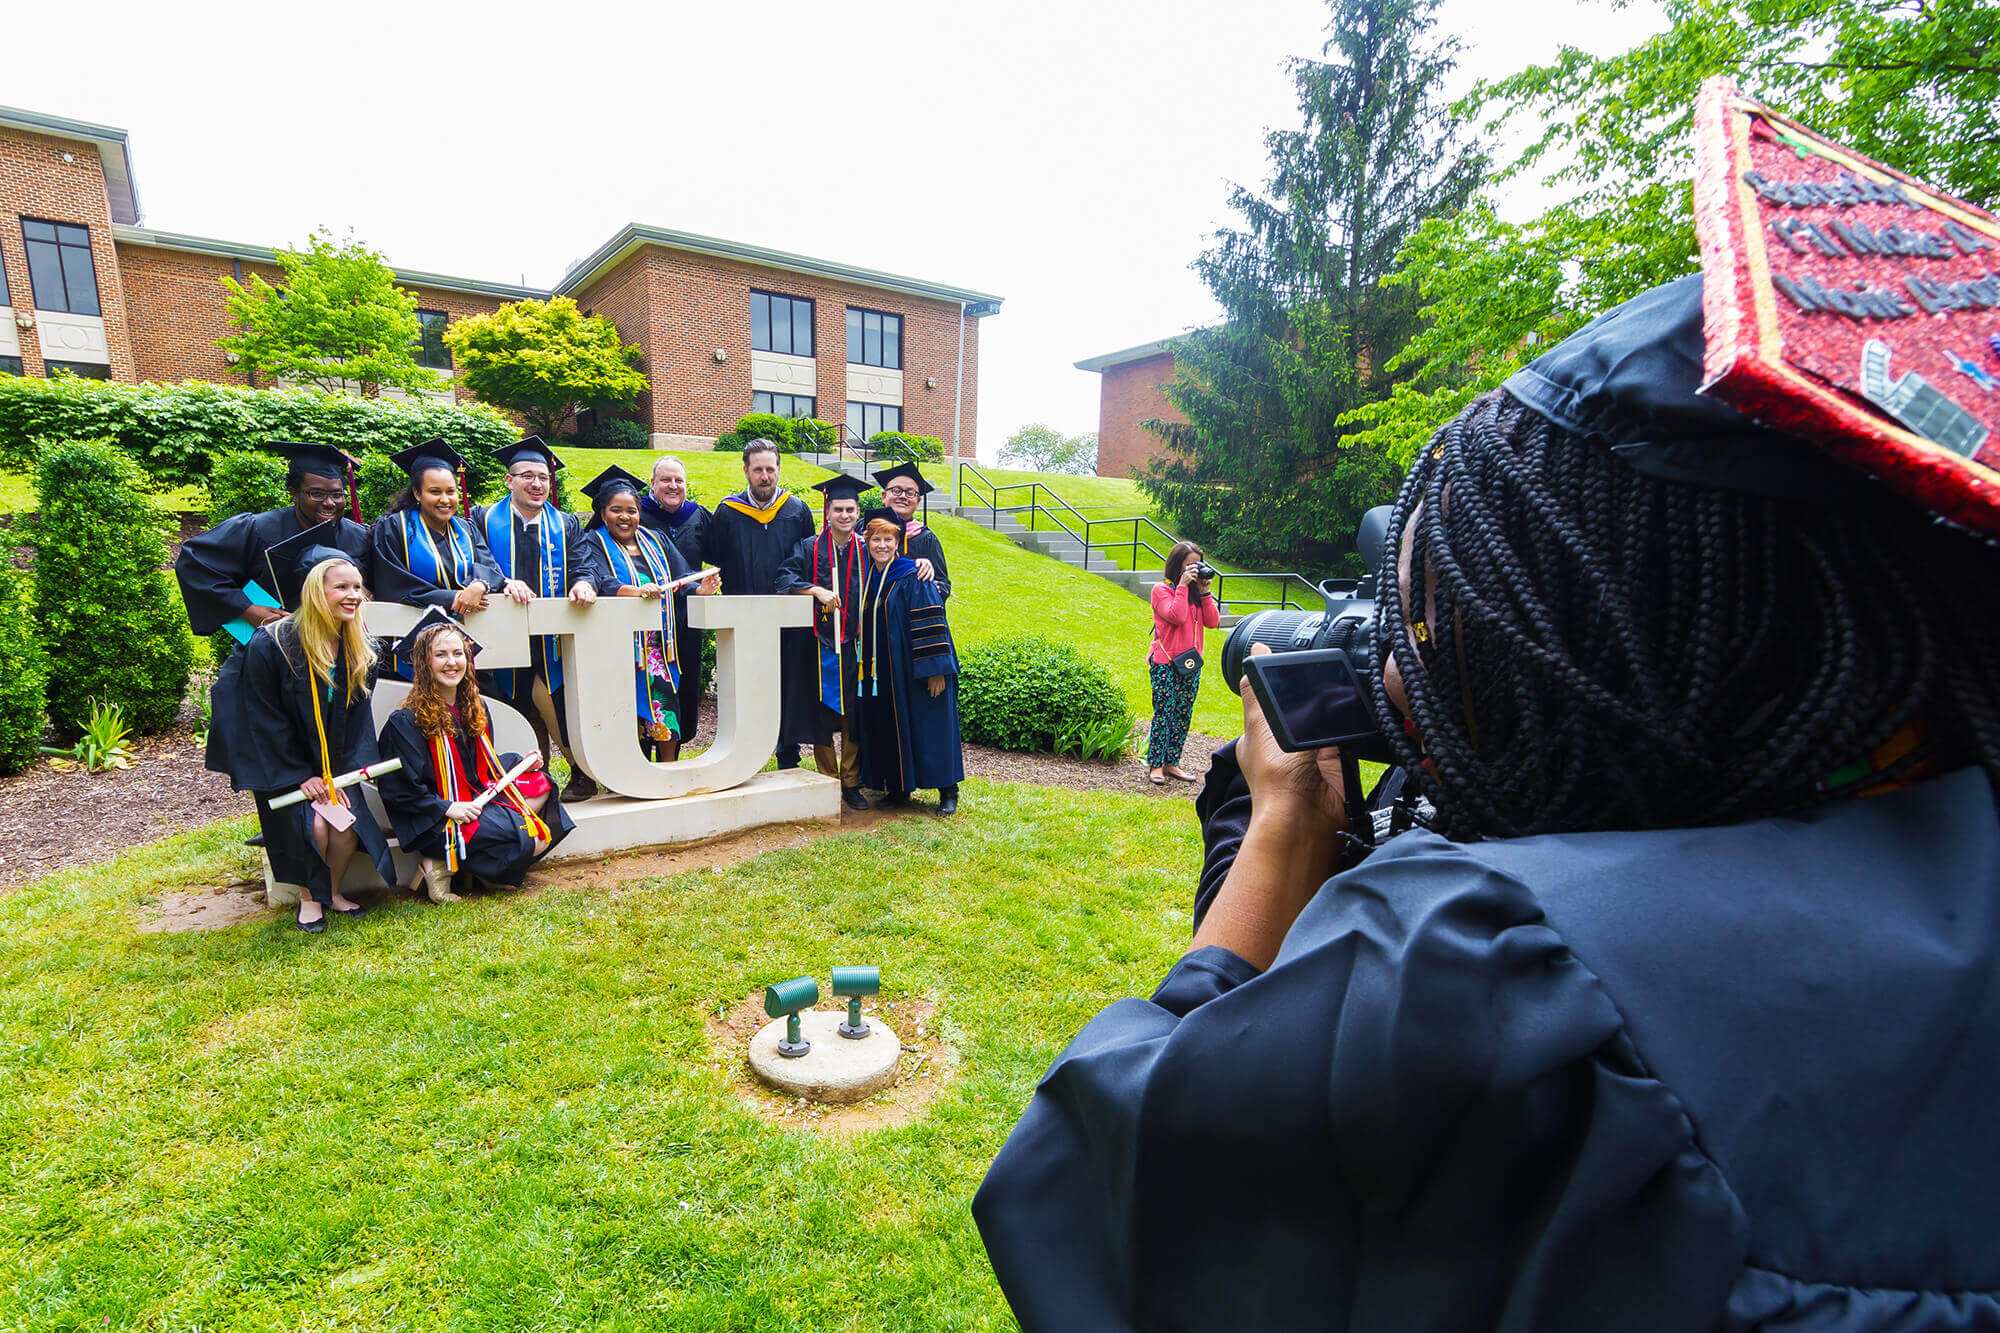 Shenandoah University To Celebrate 1,302 Graduates at May 12 Commencement First Commencement Ceremony To be Held in James R. Wilkins, Jr. Athletics & Events Center